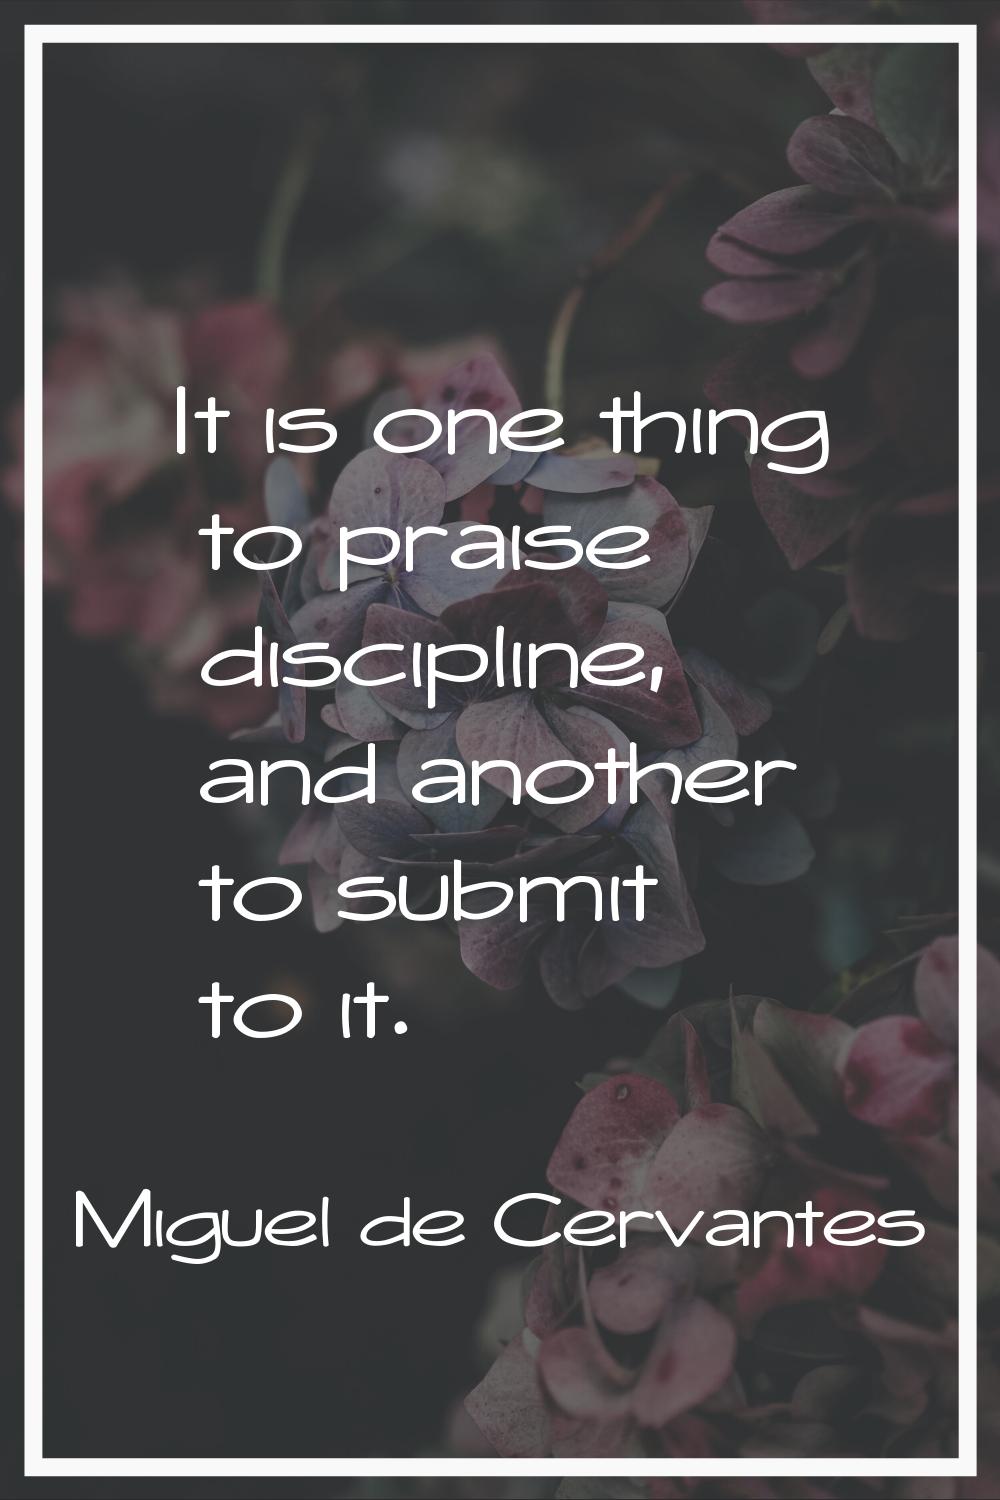 It is one thing to praise discipline, and another to submit to it.